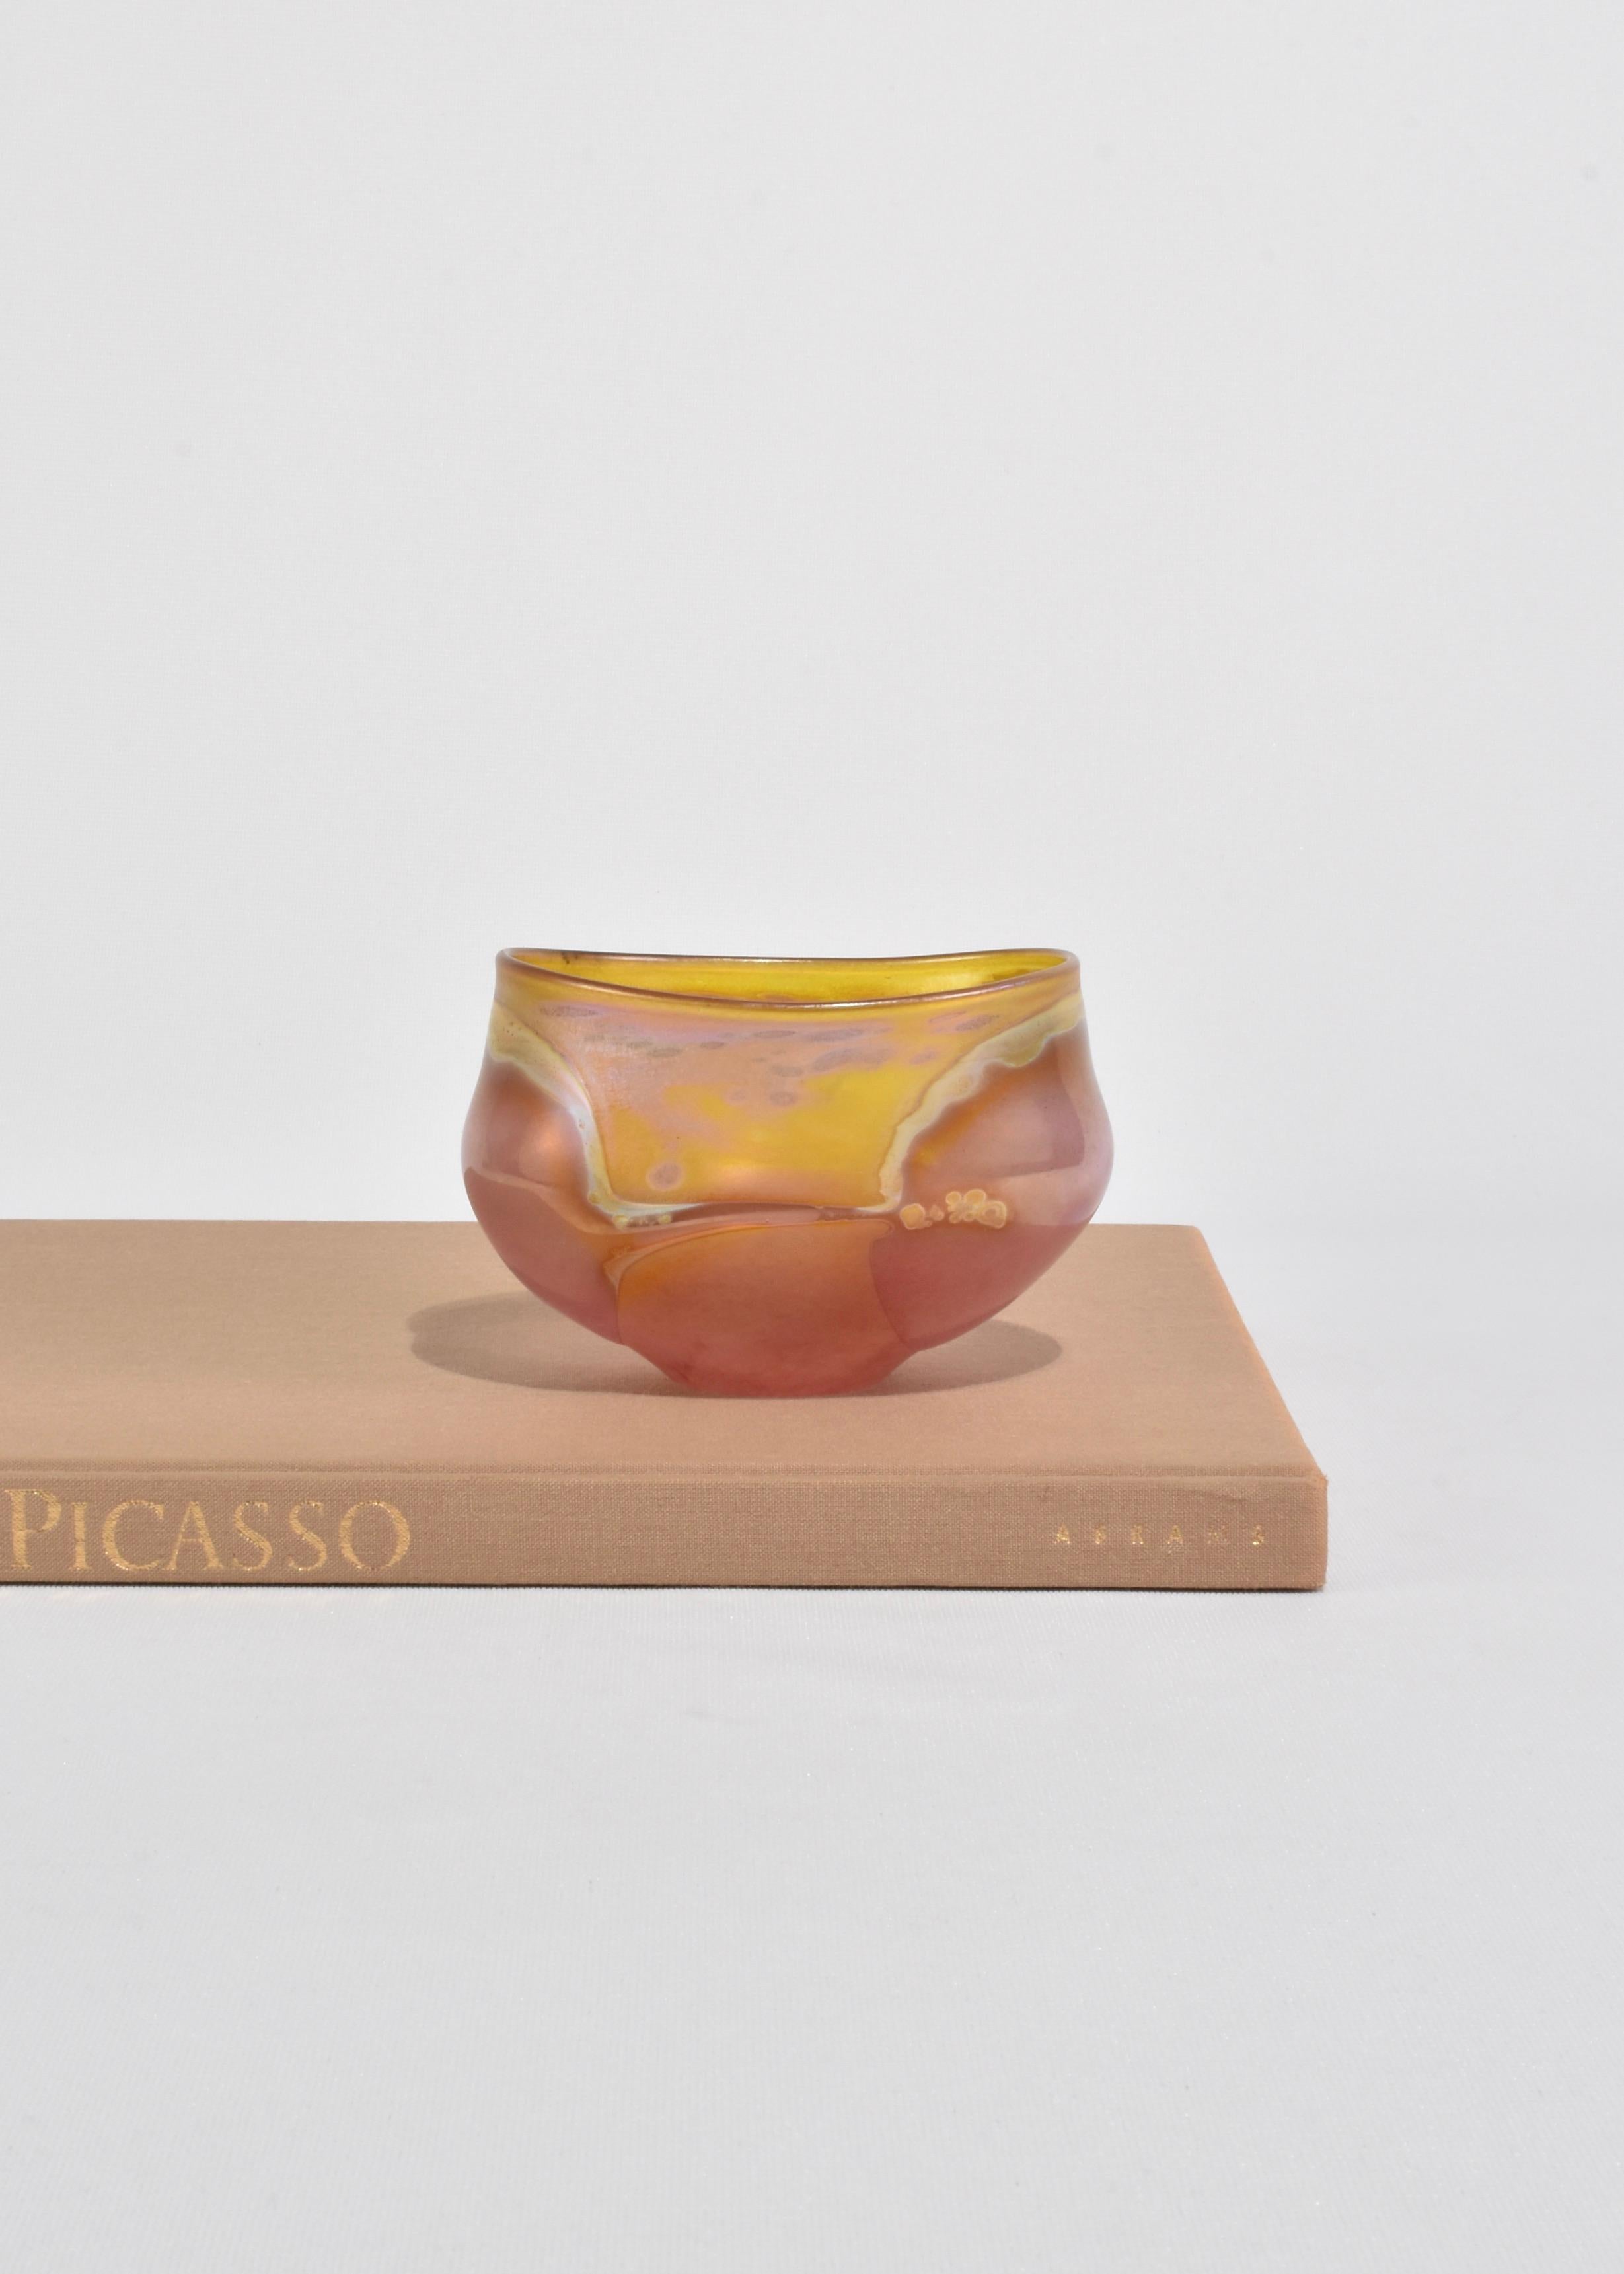 Beautiful petite blown glass bowl in iridescent yellow and pink. Signed ﻿Coleman, 1999.